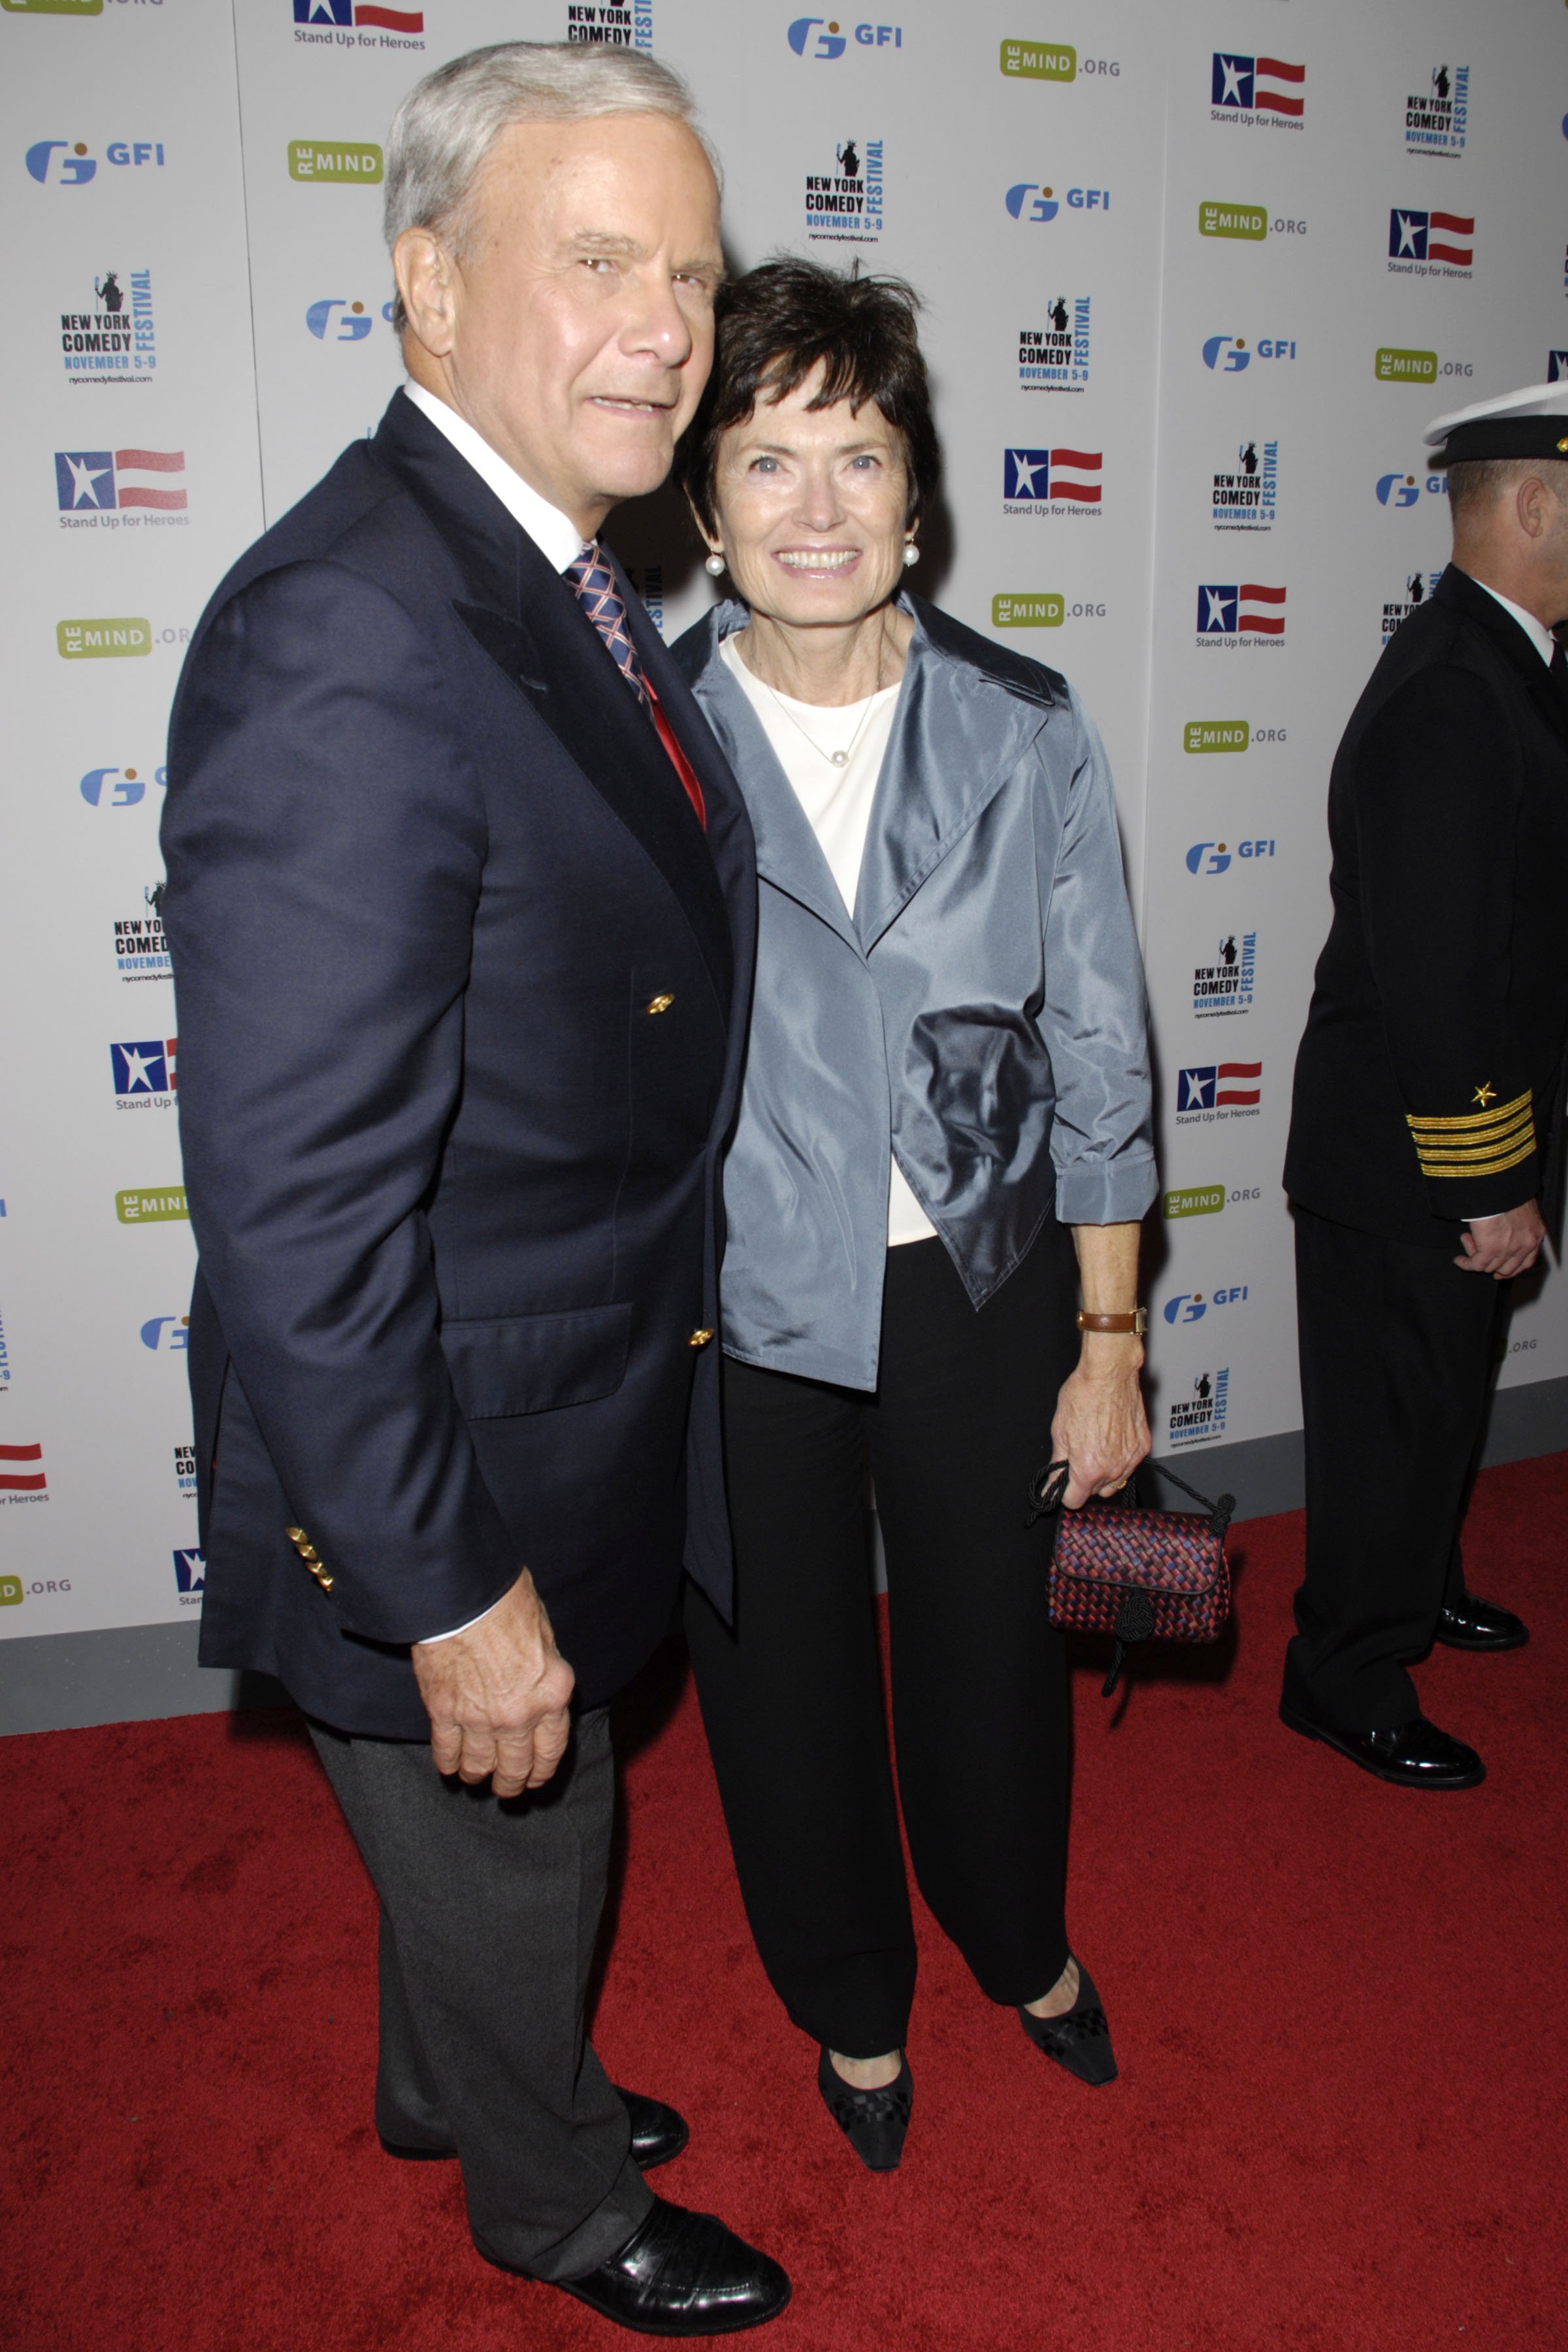     Tom Brokaw and Meredith Lynn Auld attend STAND UP FOR HEROES, an evening of comedy to benefit the BOB WOODRUFF FOUNDATION at City Hall on November 5, 2008 in New York City.  |  Source: Getty Images